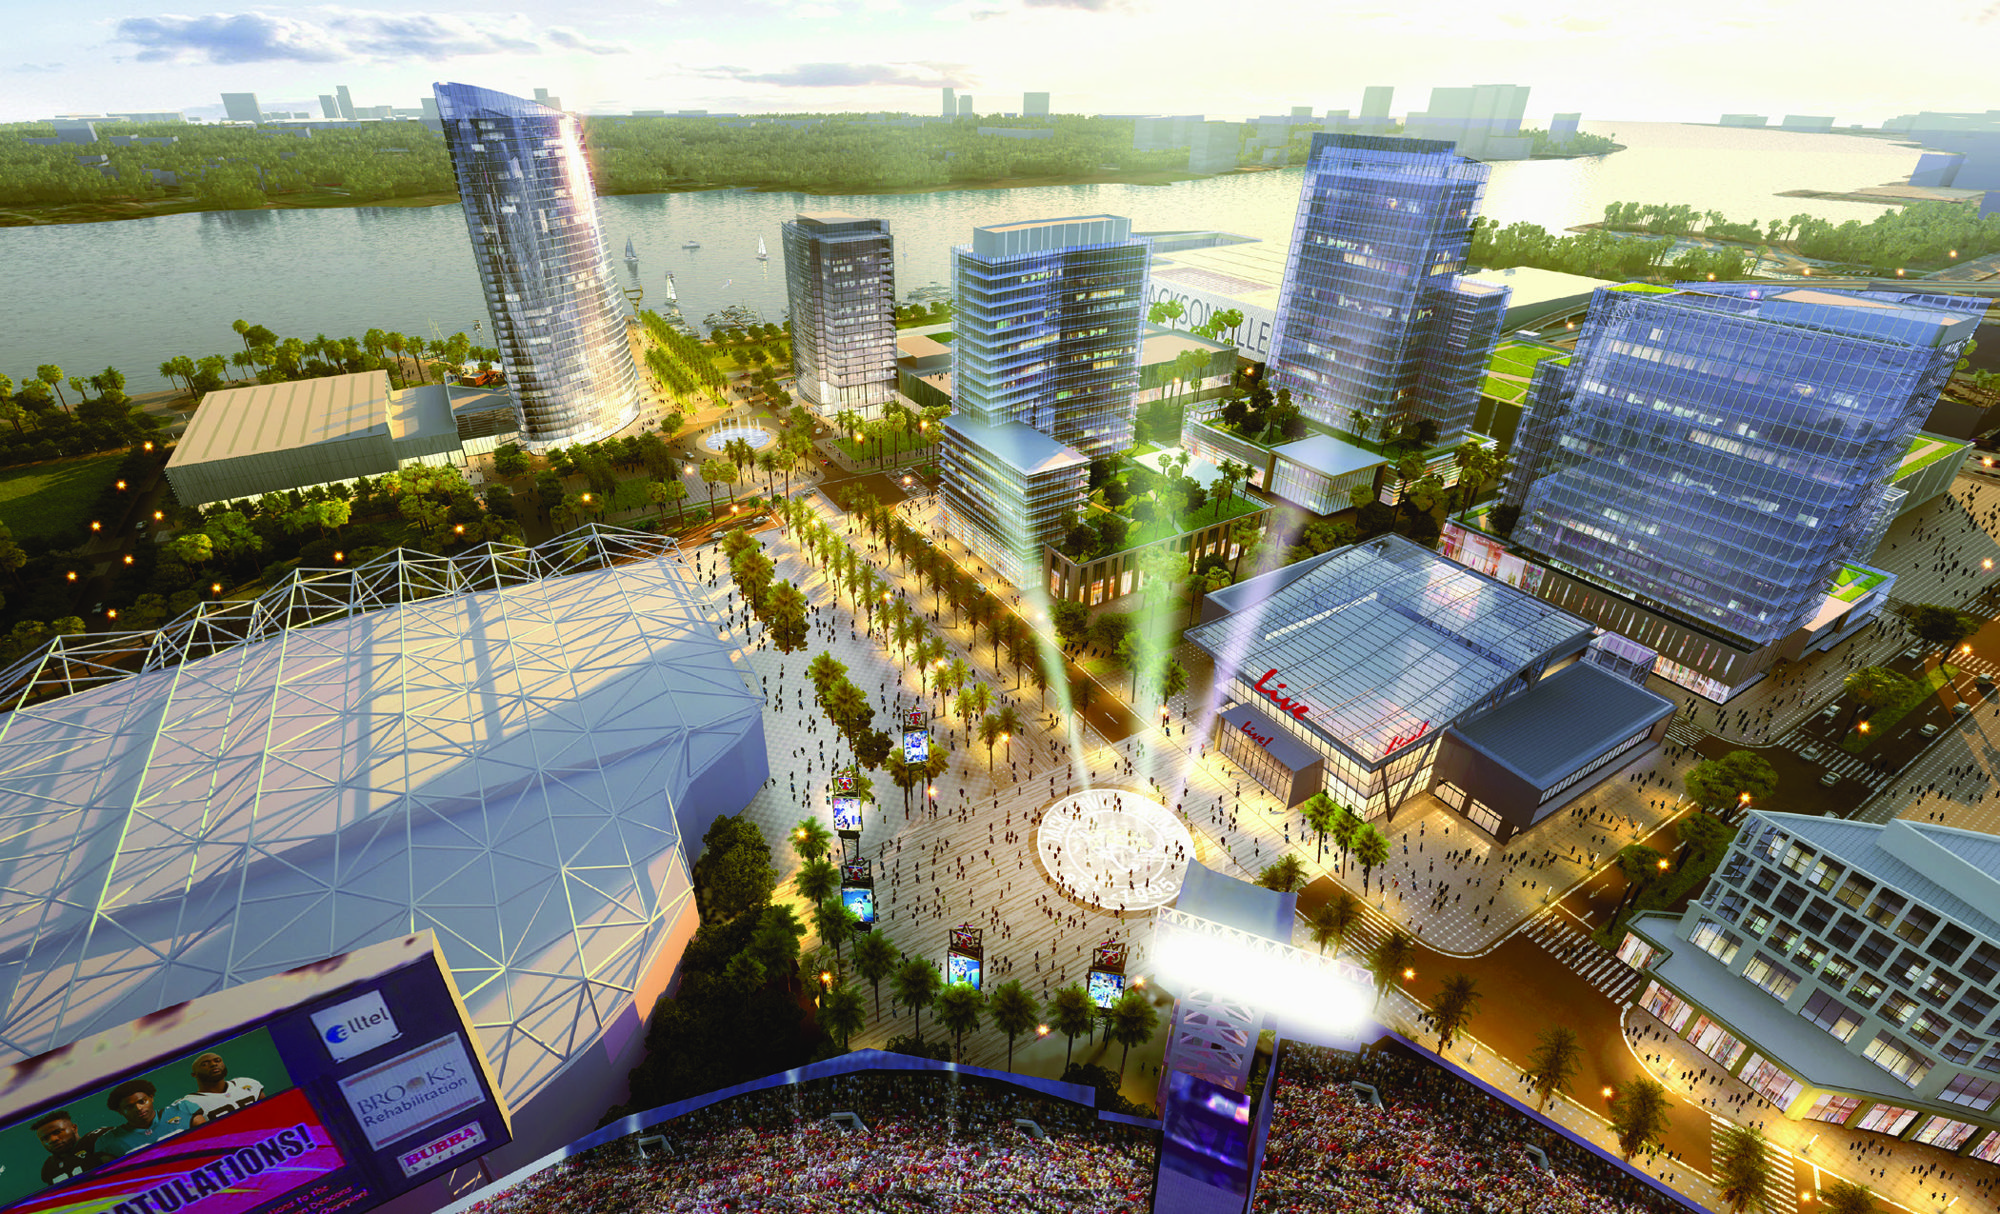 An artist’s conception of the the Lot J development adjacent to TIAA Bank Field and the site of Metropolitan Park.